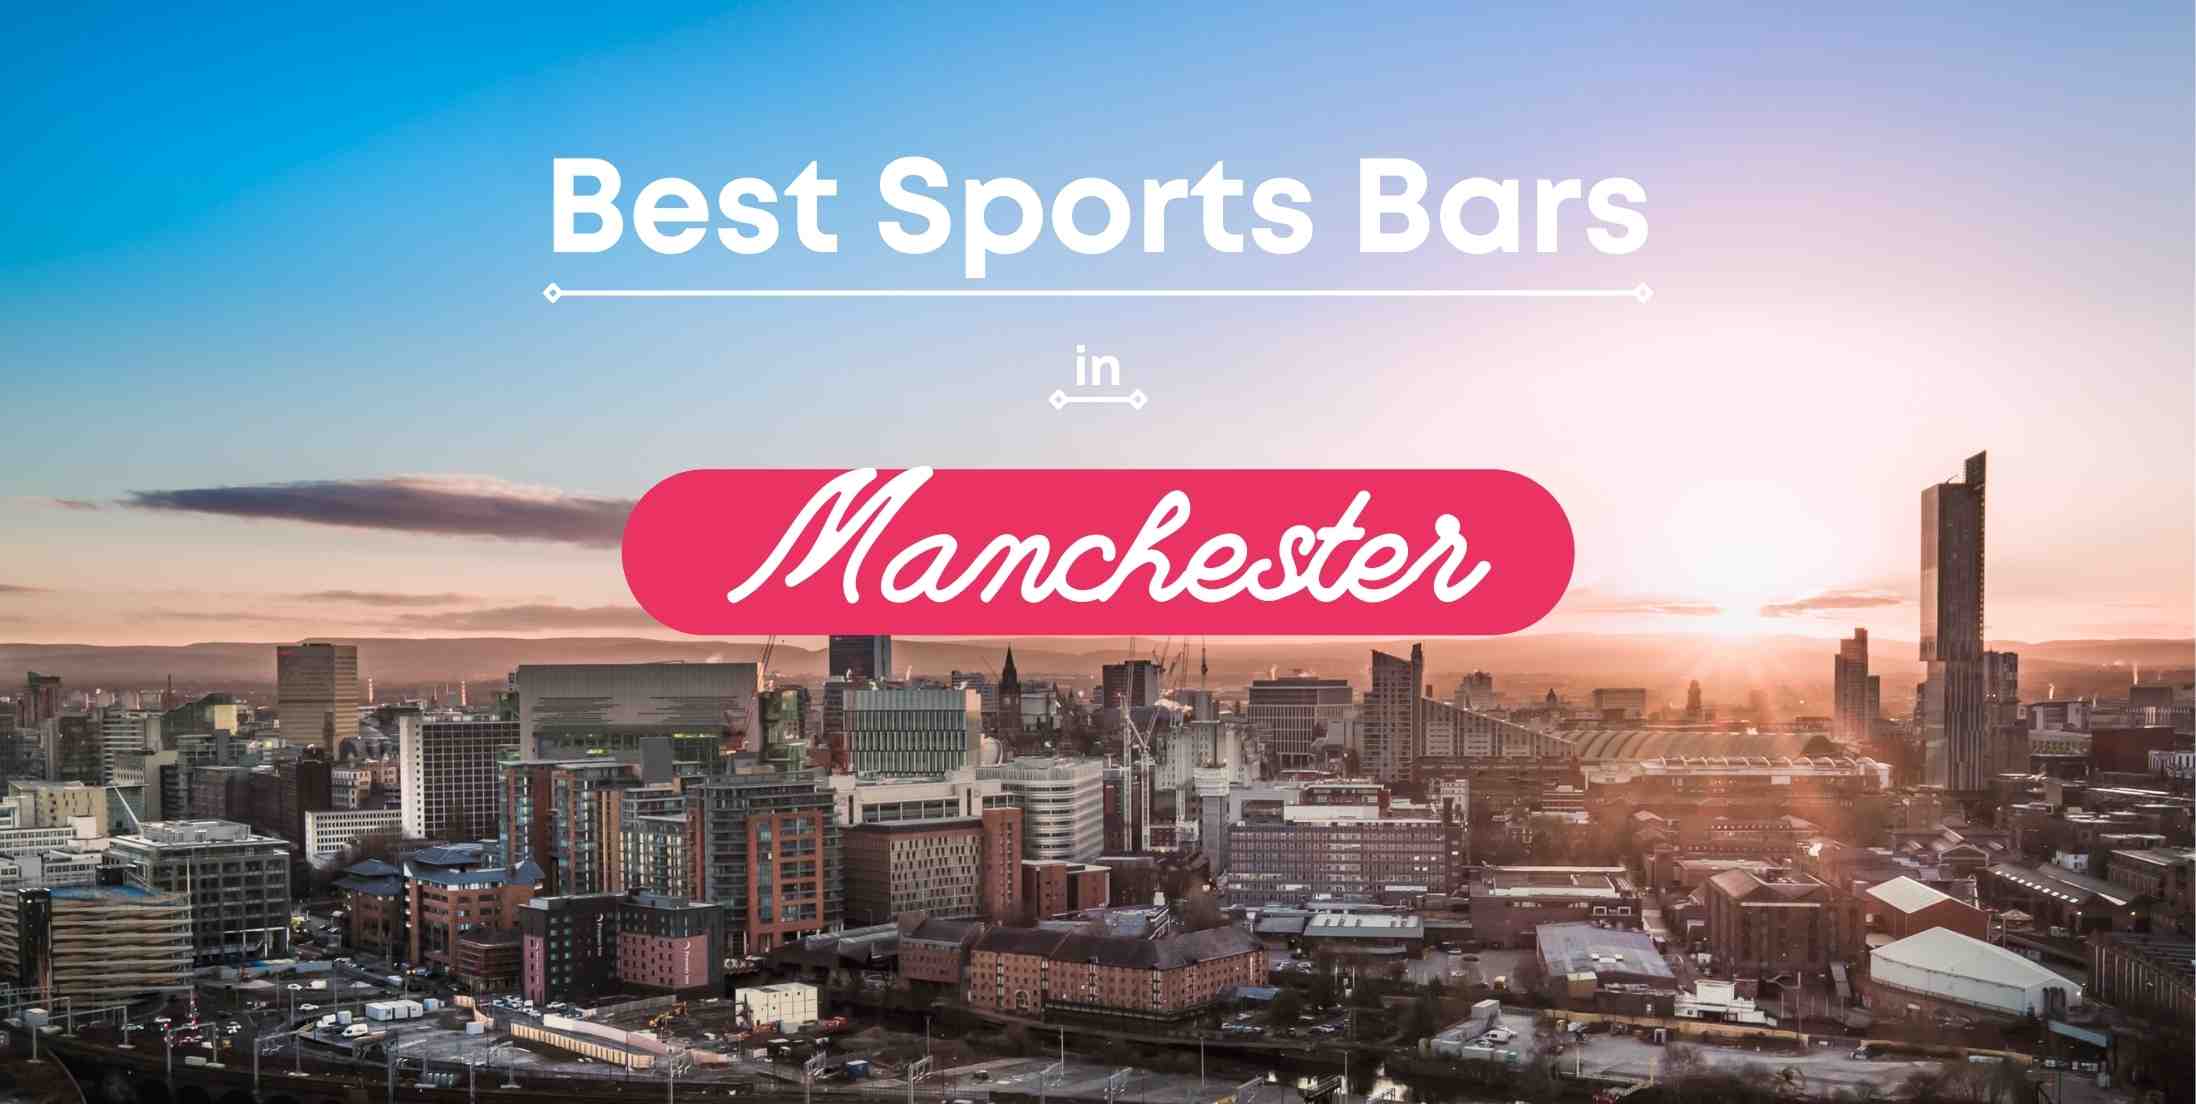 Best Sports Bars in Manchester